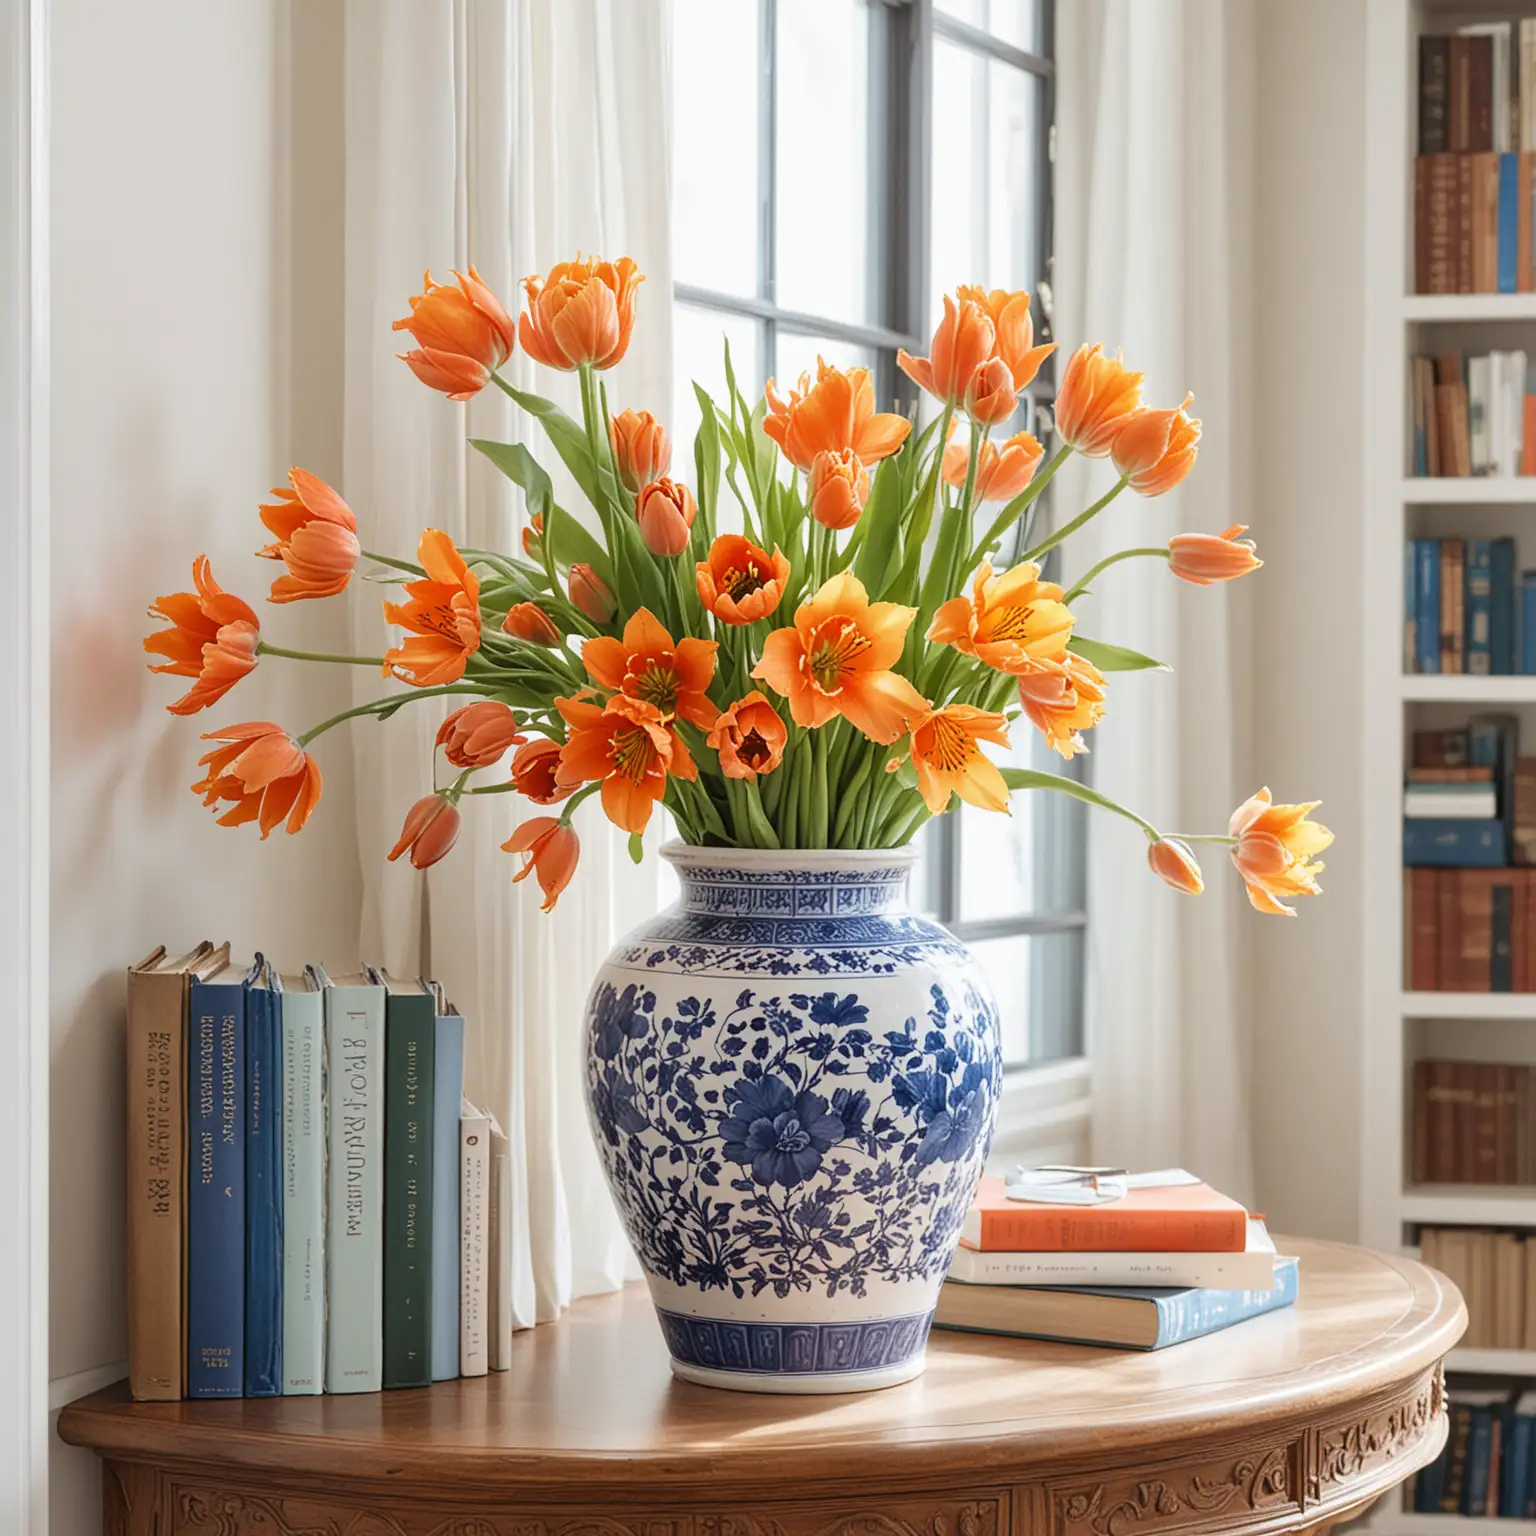 Chinoiserie Round Vase with Orange Parrot Tulips on Console Elegant Floral Decor